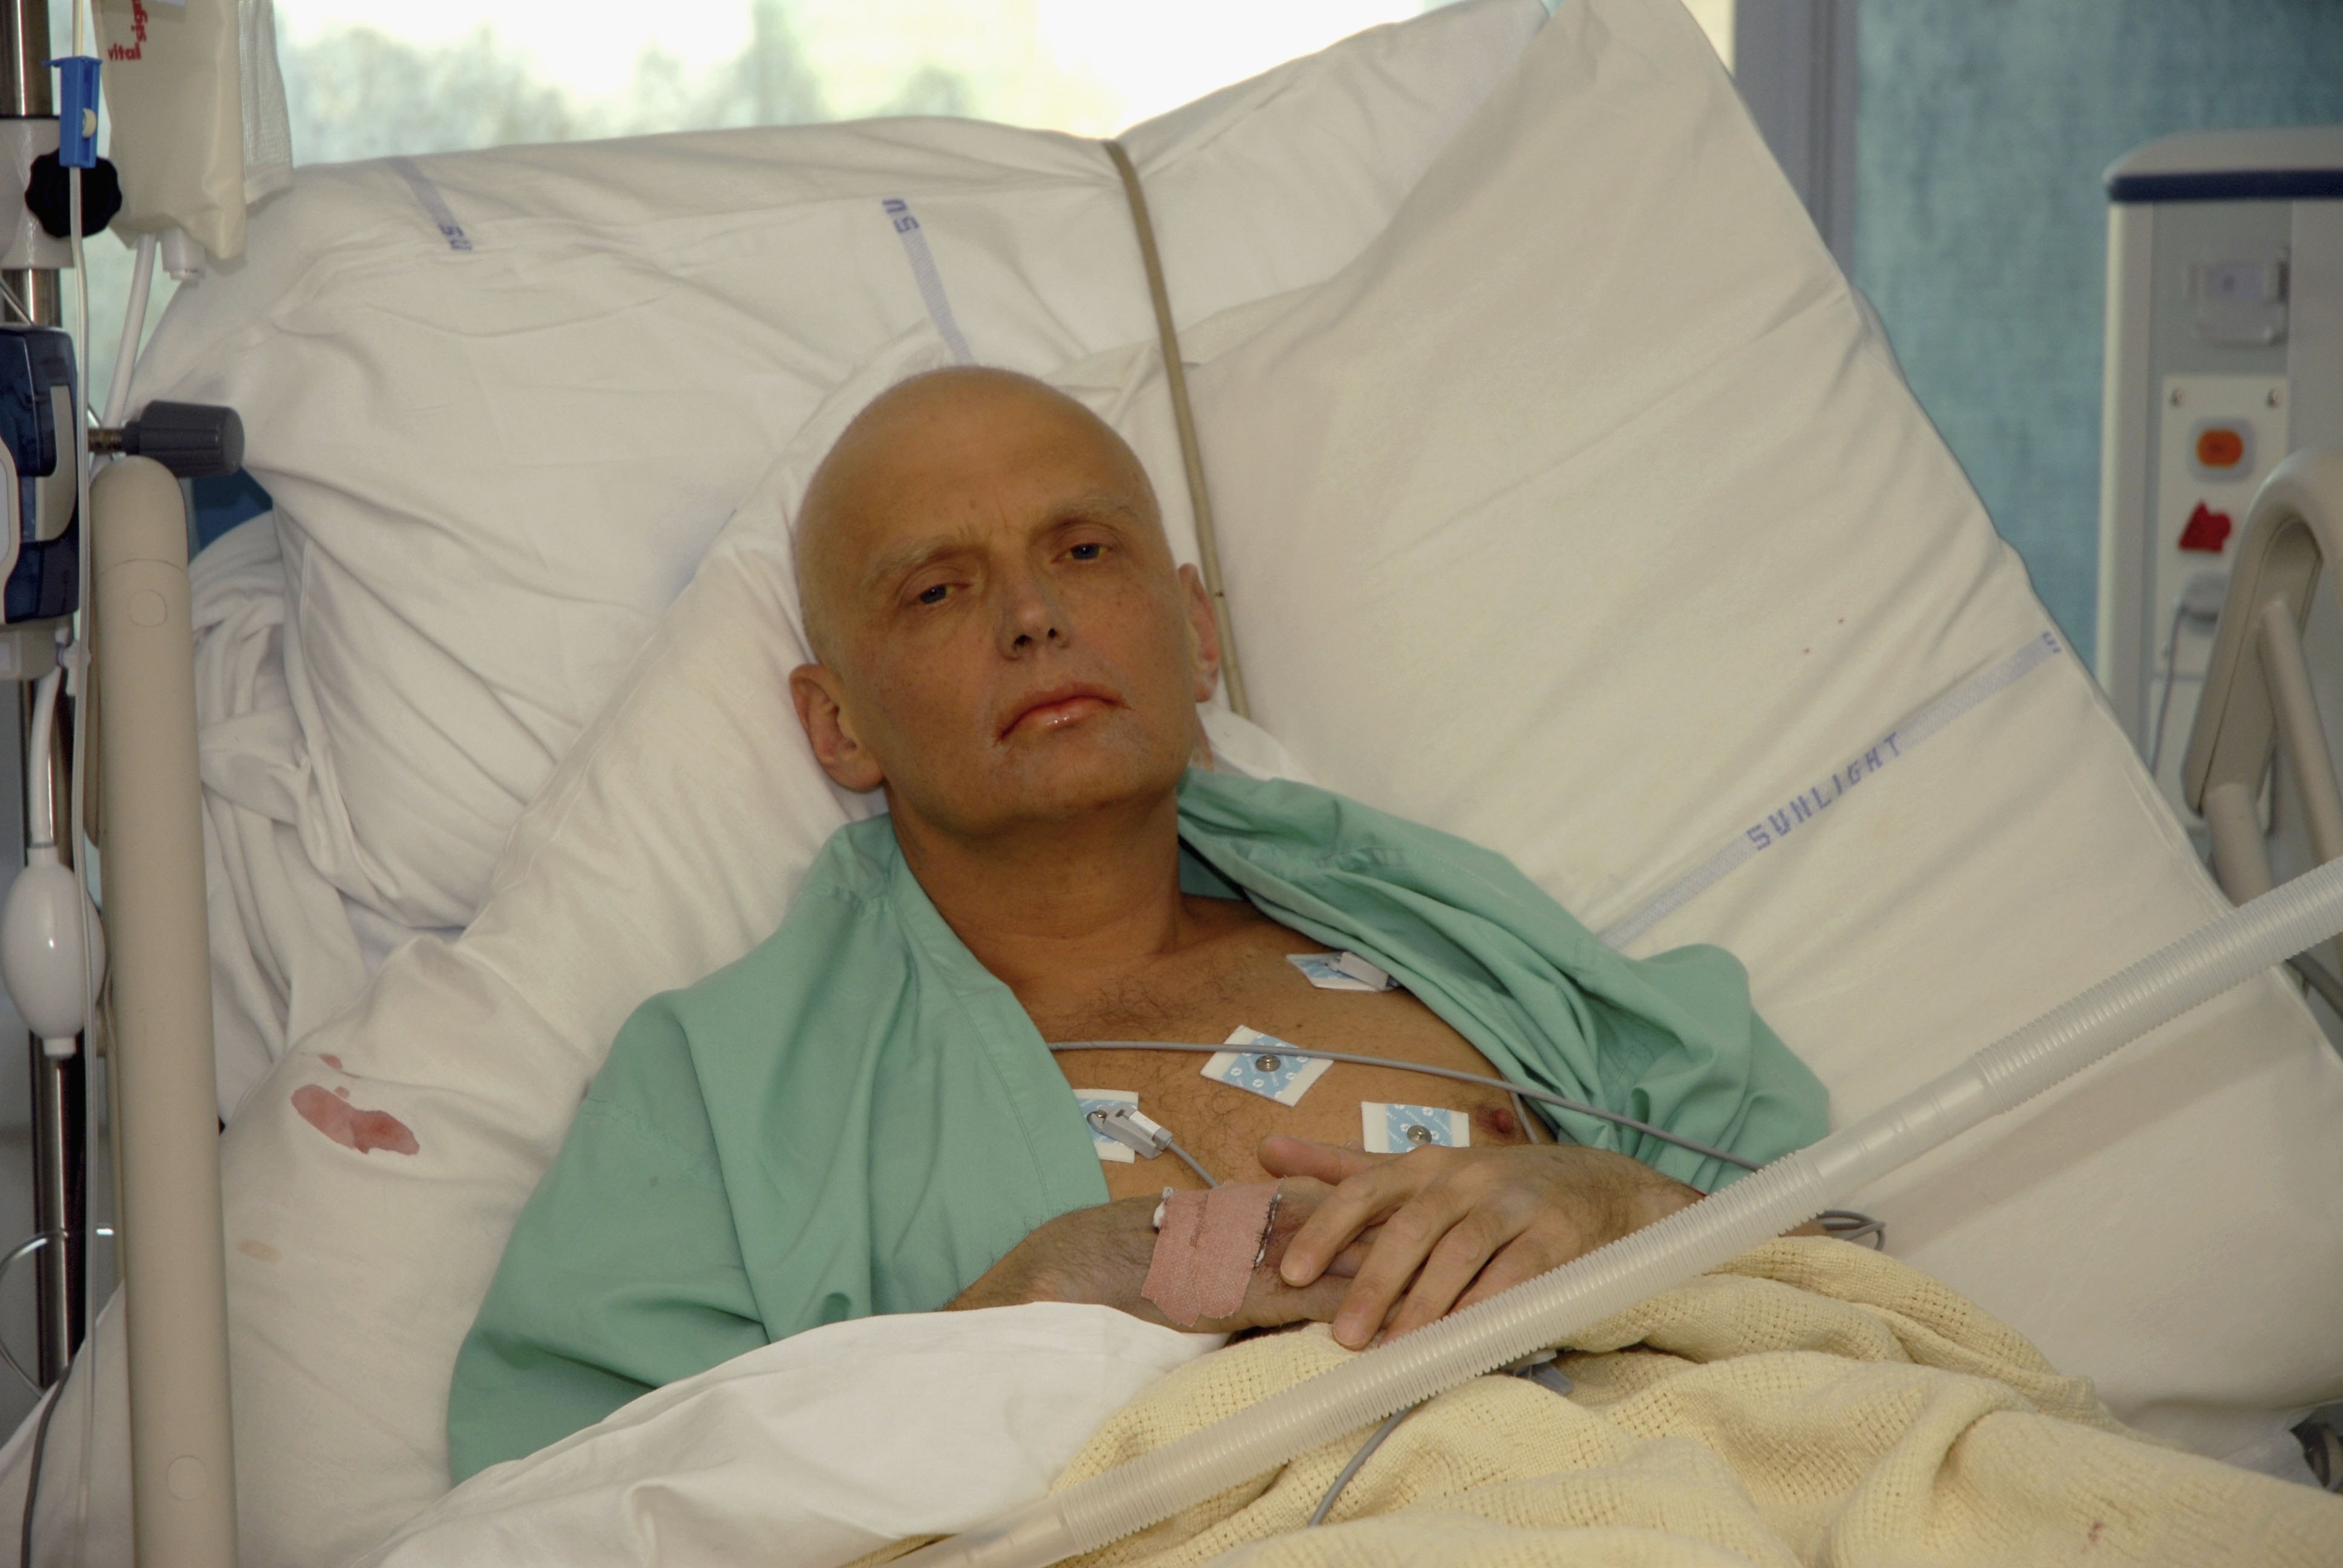 In this image made available on November 25, 2006, Alexander Litvinenko is pictured at the Intensive Care Unit of University College Hospital on November 20, 2006 in London, England. The 43-year-old former KGB spy who died on Thursday 23rd November, accused Russian President Vladimir Putin in the involvement of his death. Mr Litvinenko died following the presence of the radioactive polonium-210 in his body. Russia's foreign intelligence service has denied any involvement in the case. (Natasja Weitsz—Getty Images)